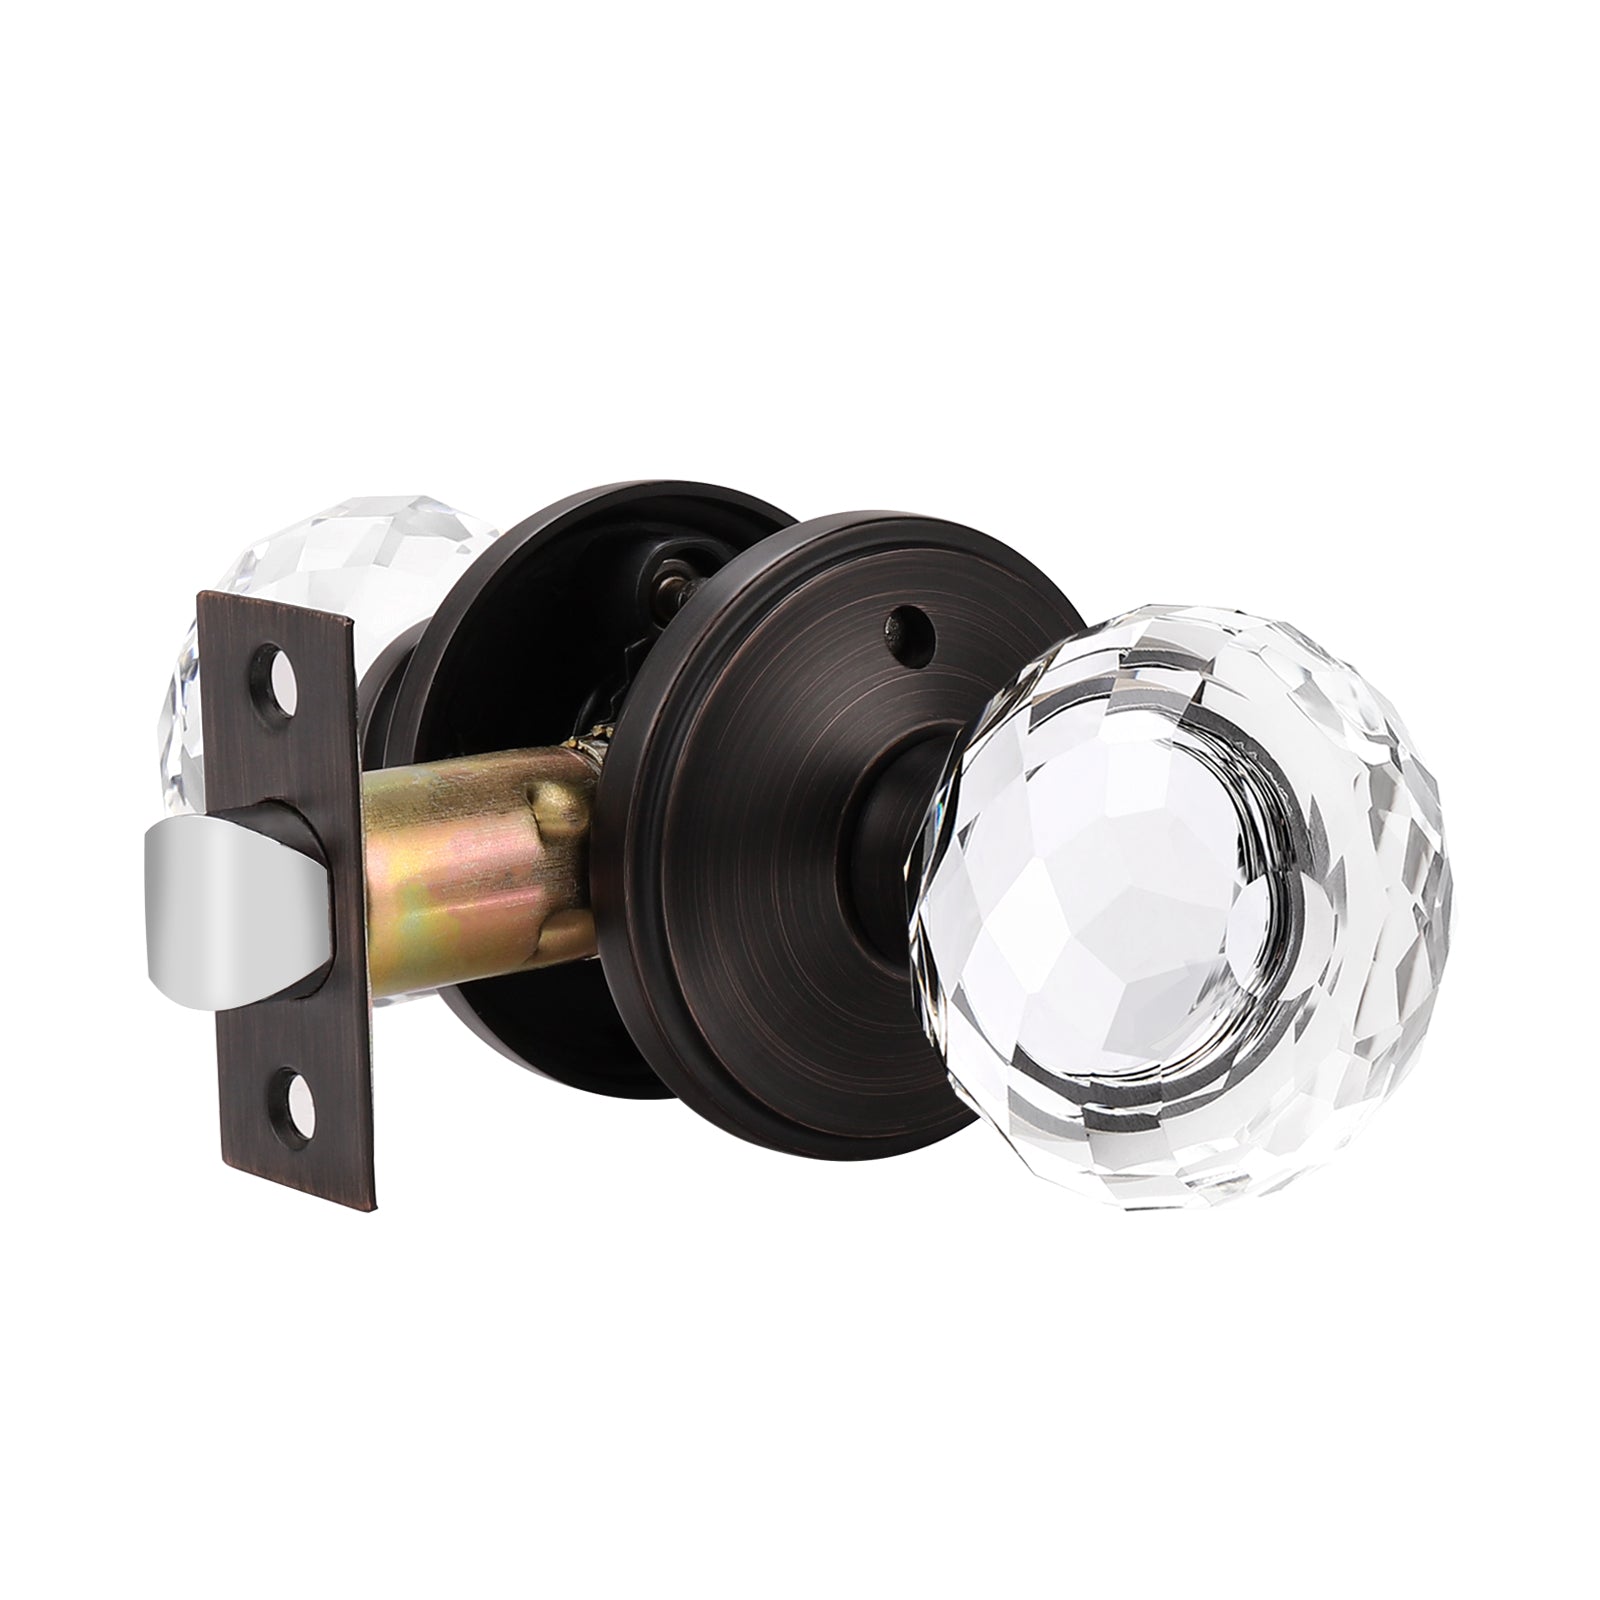 Diamond Crystal Glass Door Knobs with Oil Rubbed Bronzze Round Rosette, Privacy/Passage/Dummy Door Lock DLC10ORB